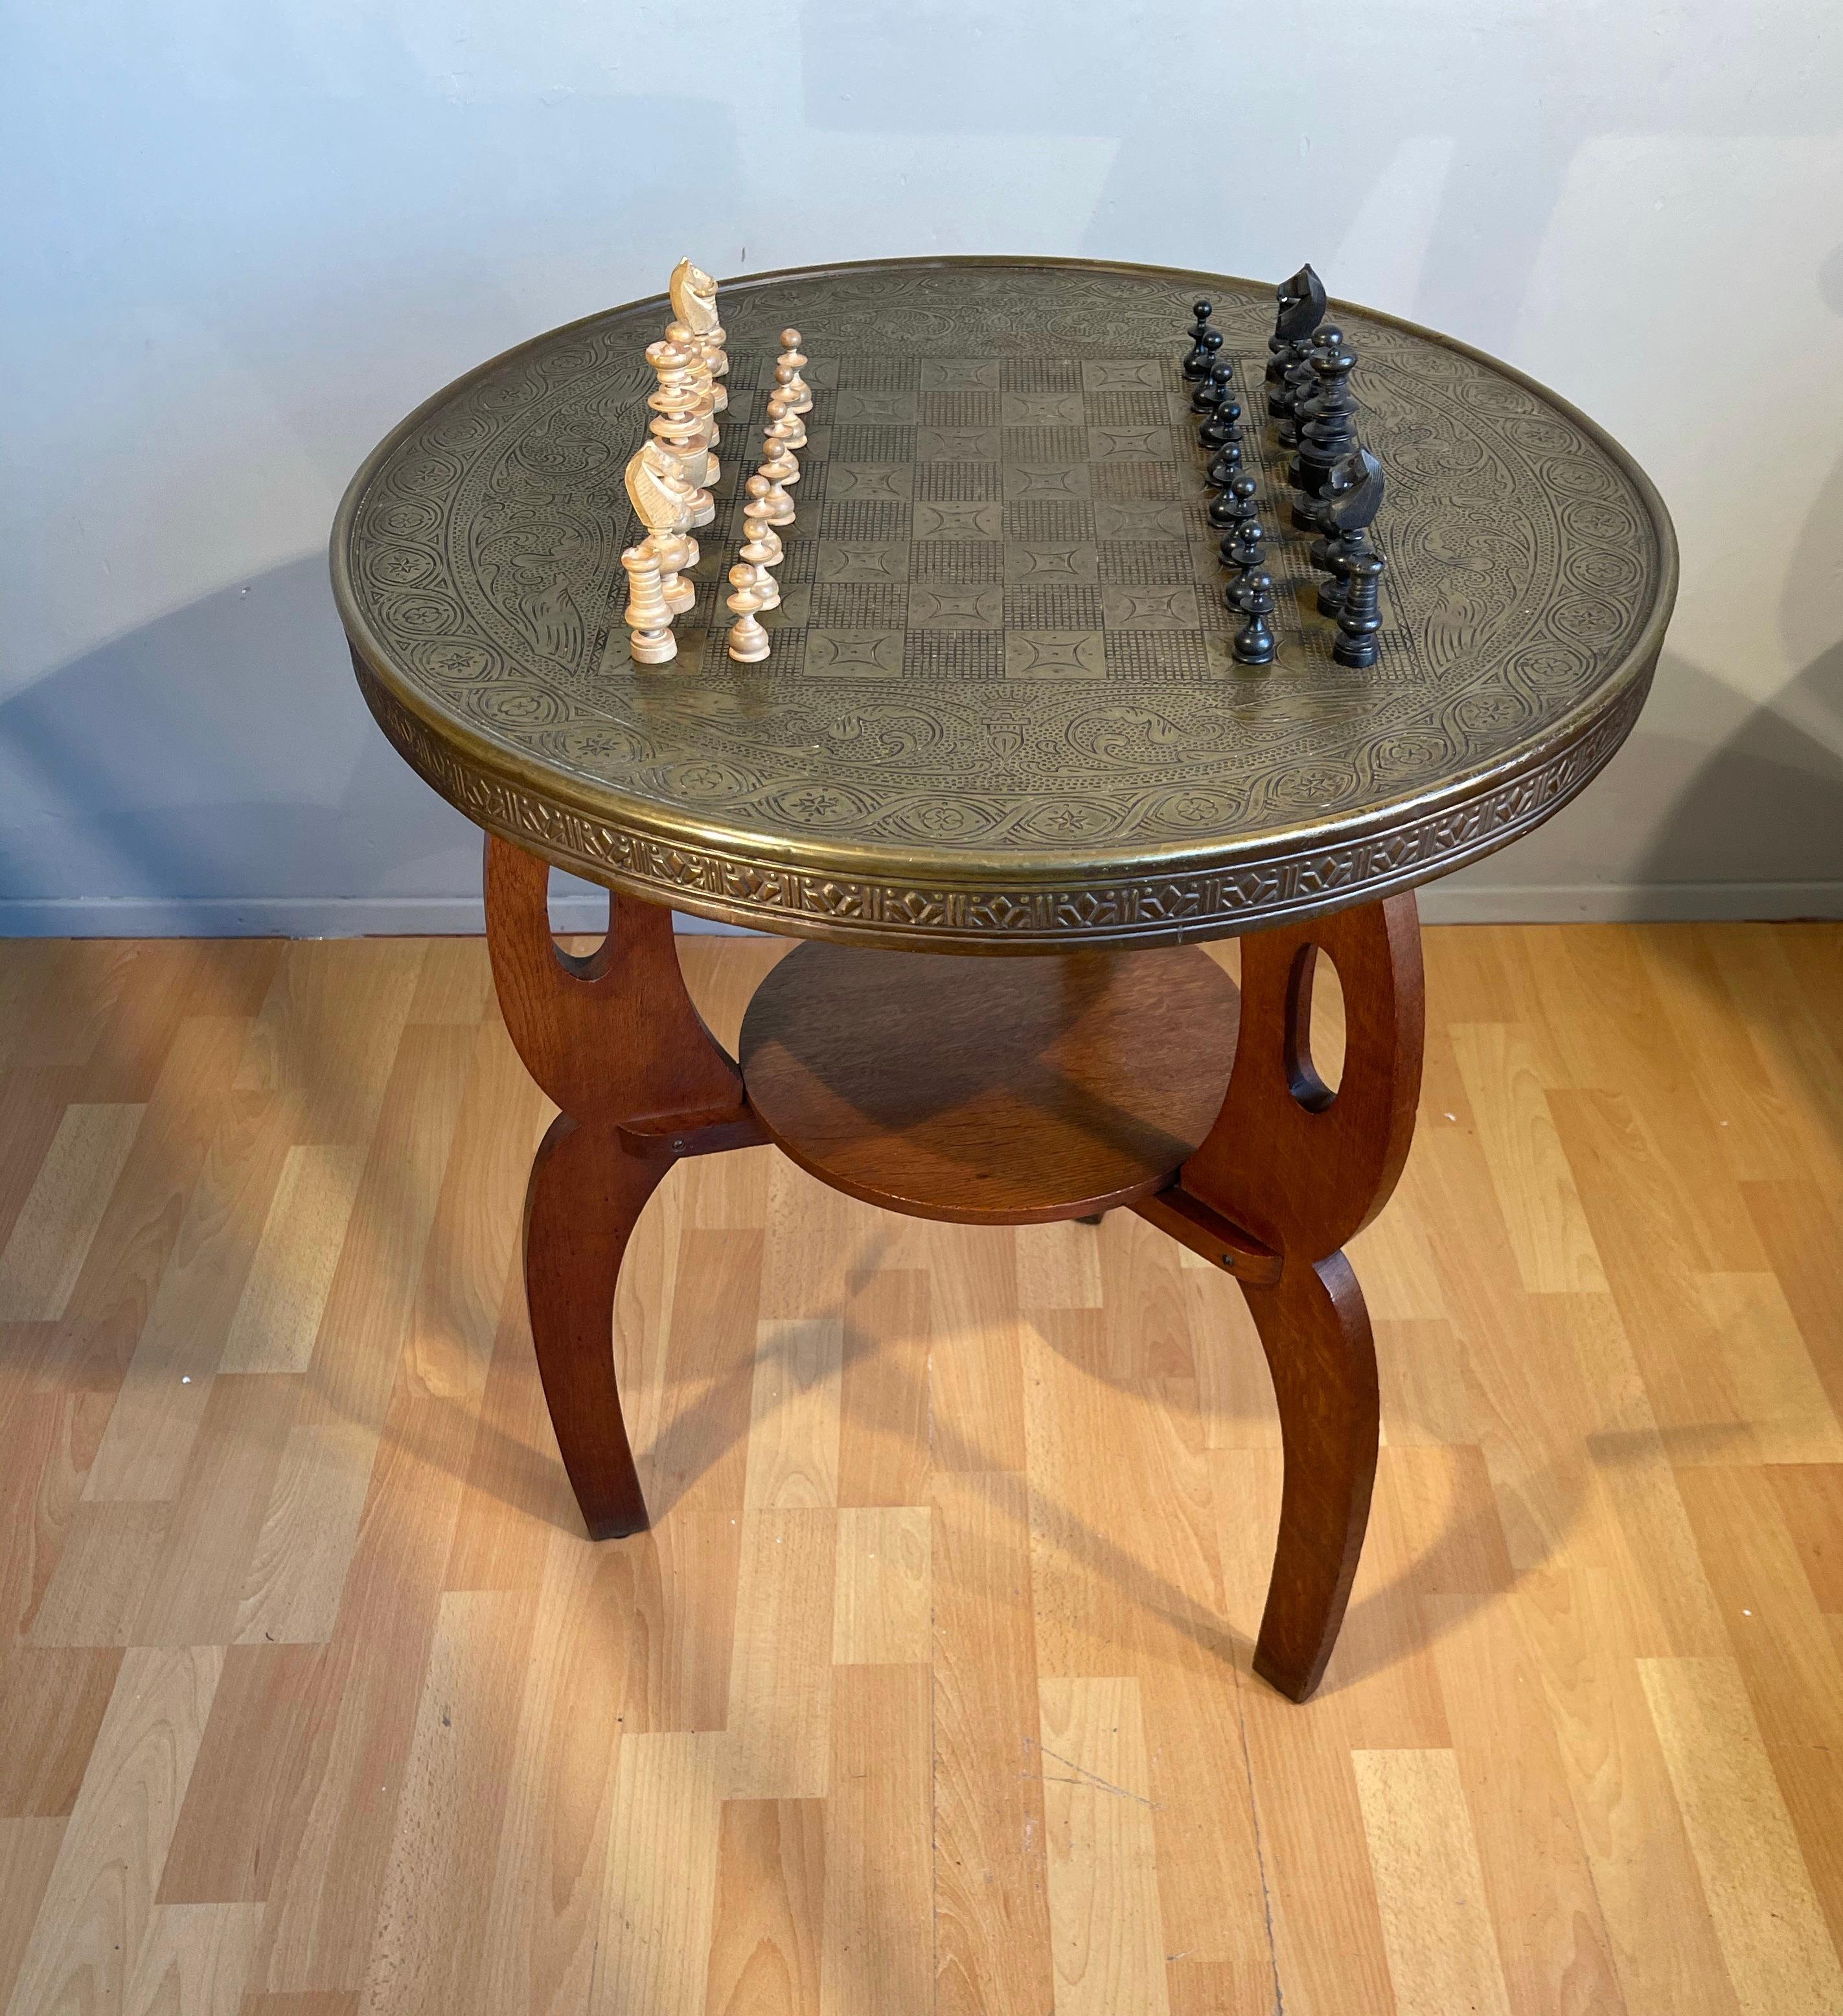 Antique Arts & Crafts chess table for playing the game in style.

The combination of the beautifully designed, tiger oak base and the embossed brass table top is of a style and class that you just don't find anymore. To find a unique chess table